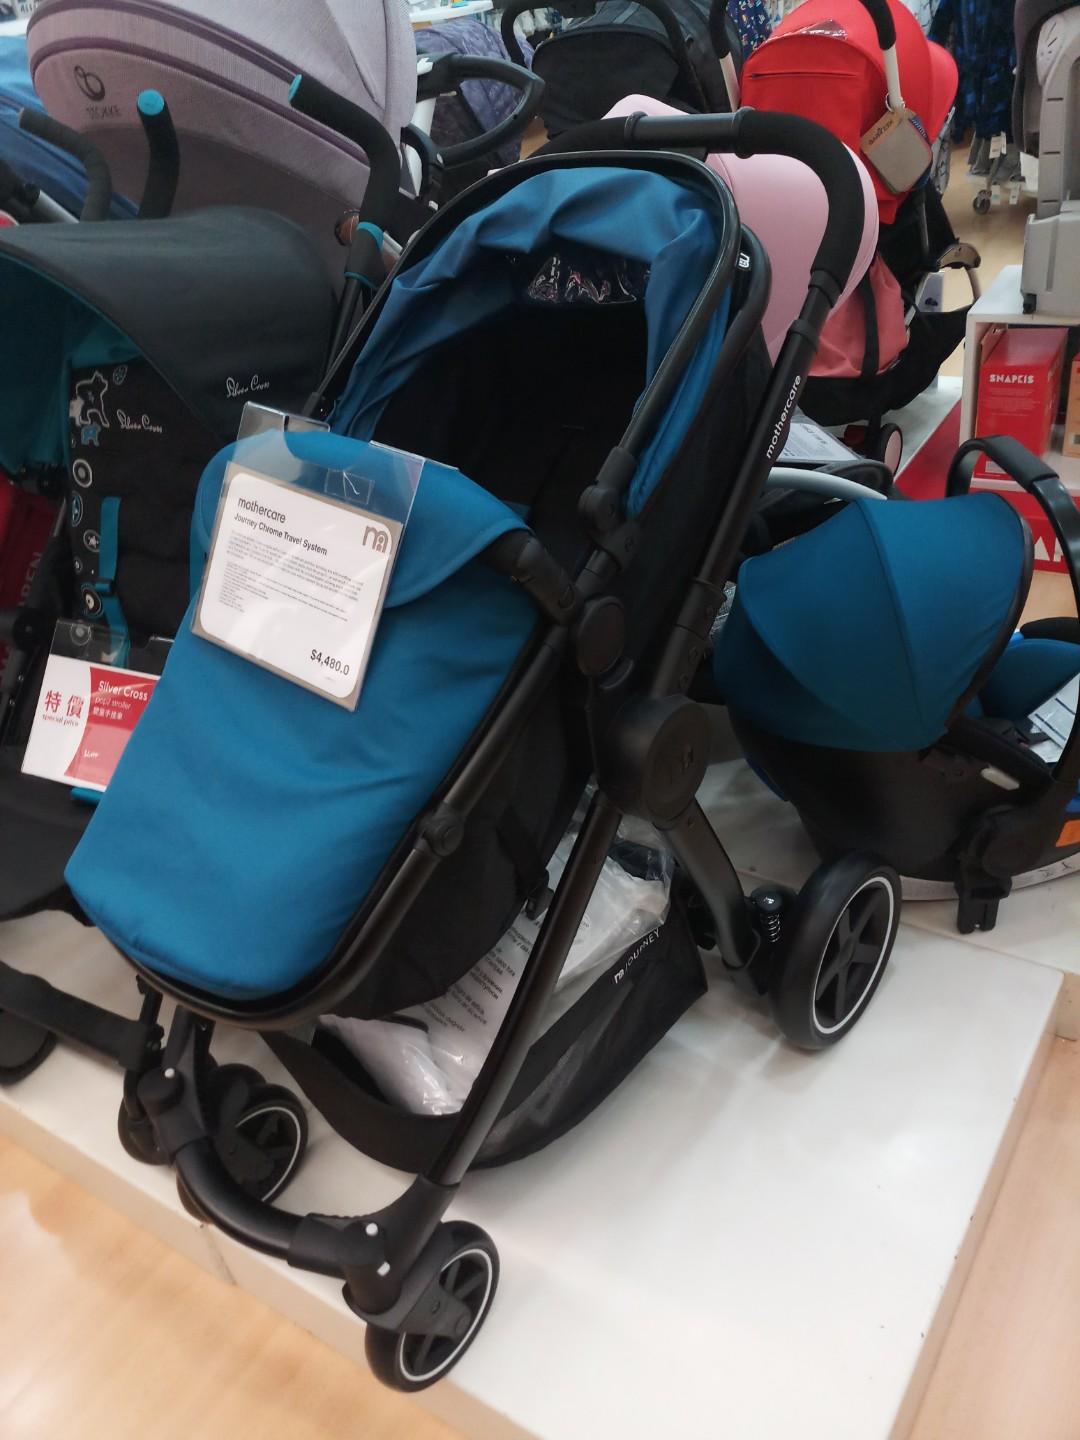 mothercare journey teal